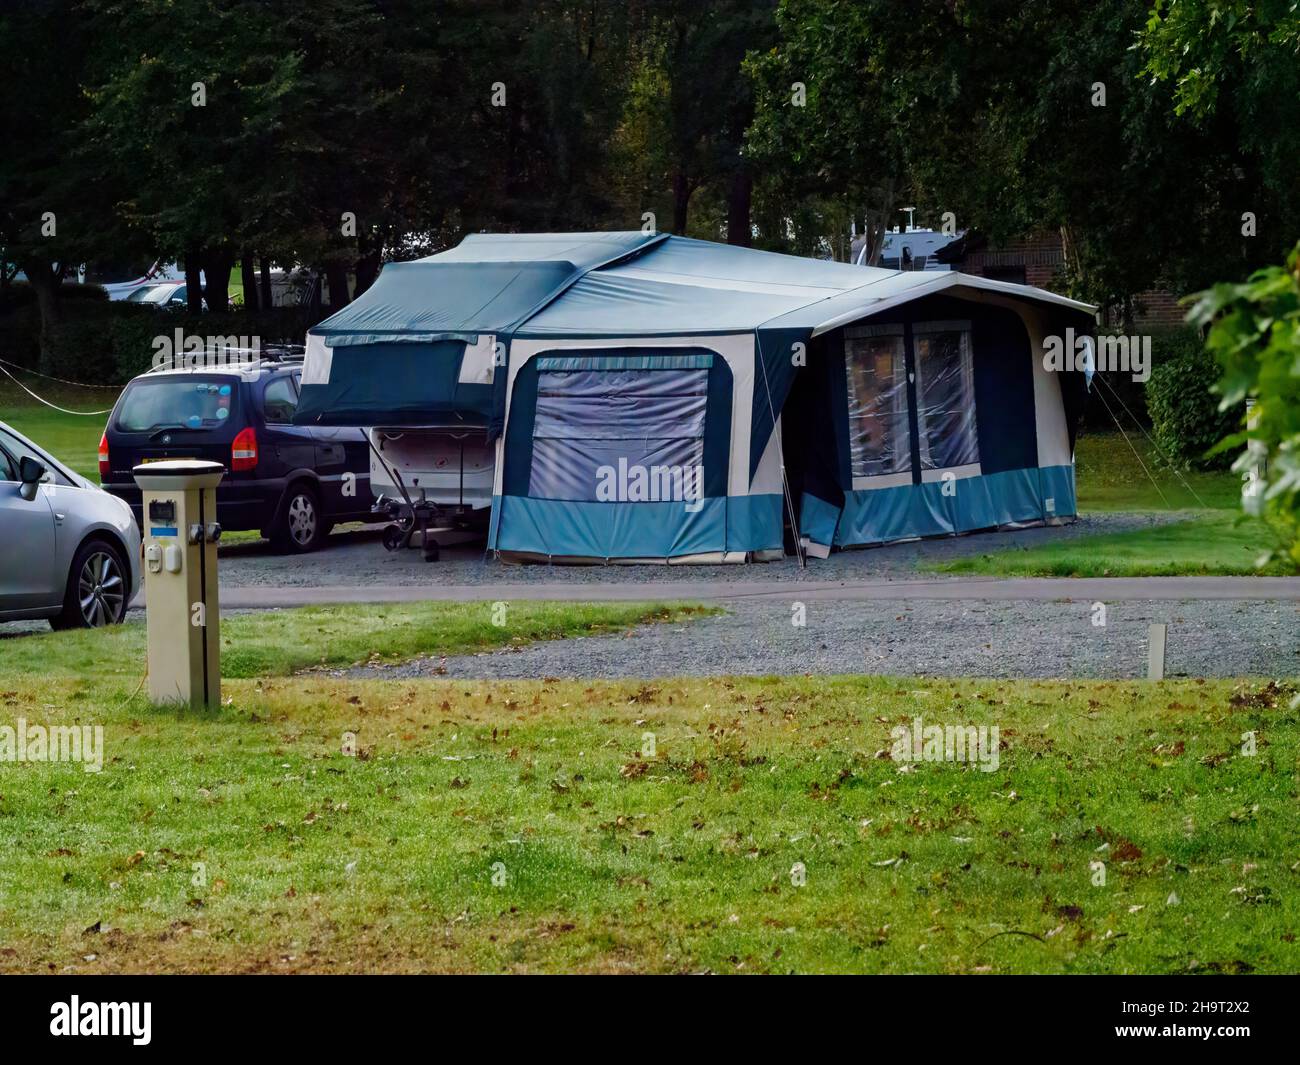 Trailer tent on a campsite, UK Stock Photo